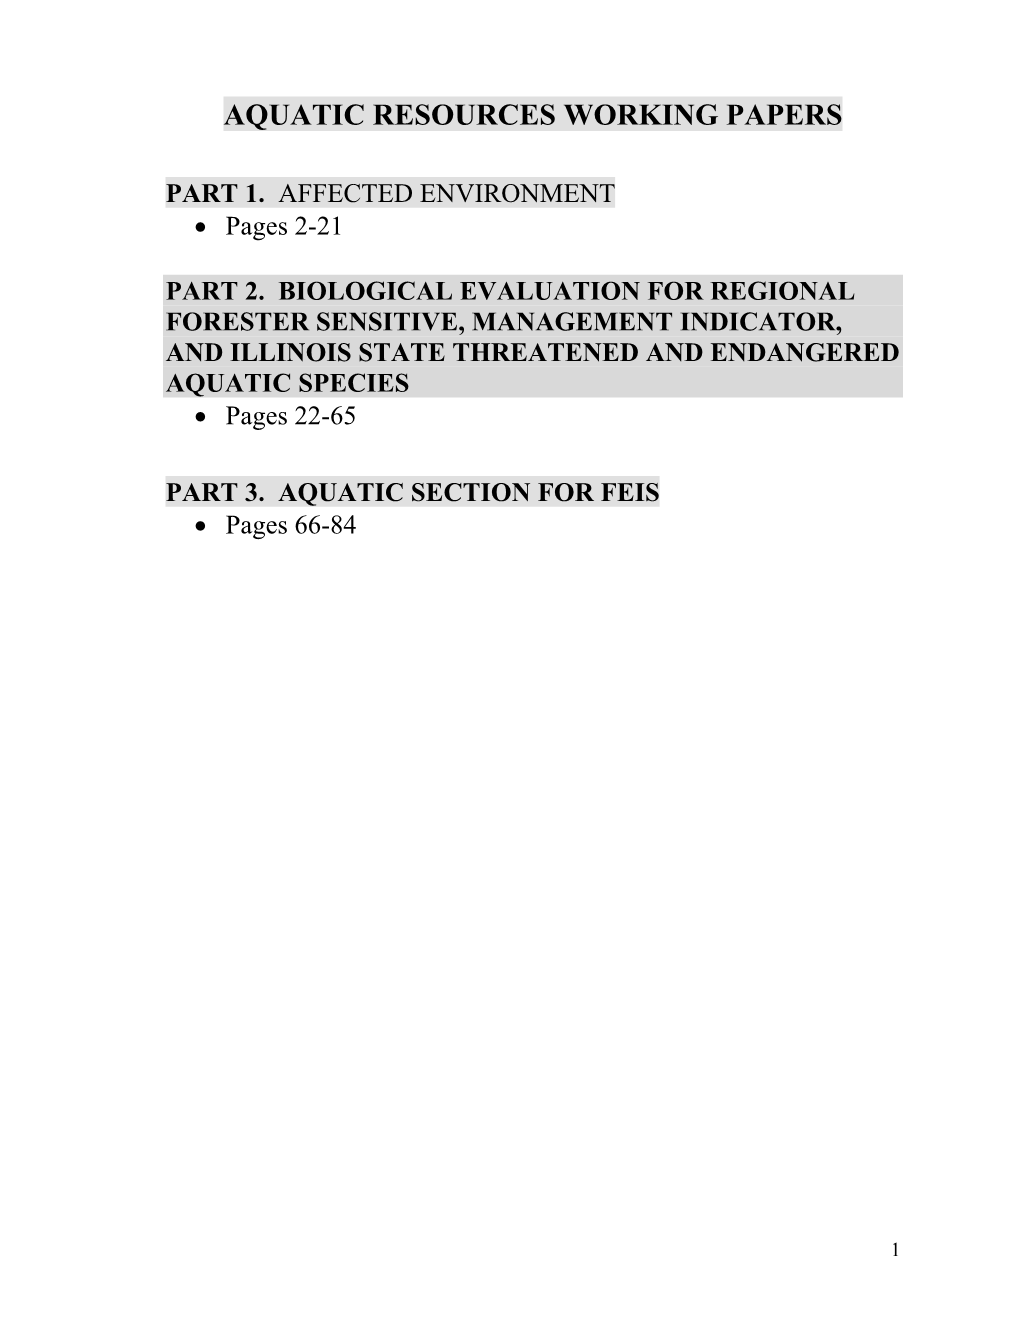 Aquatic Resources Working Papers